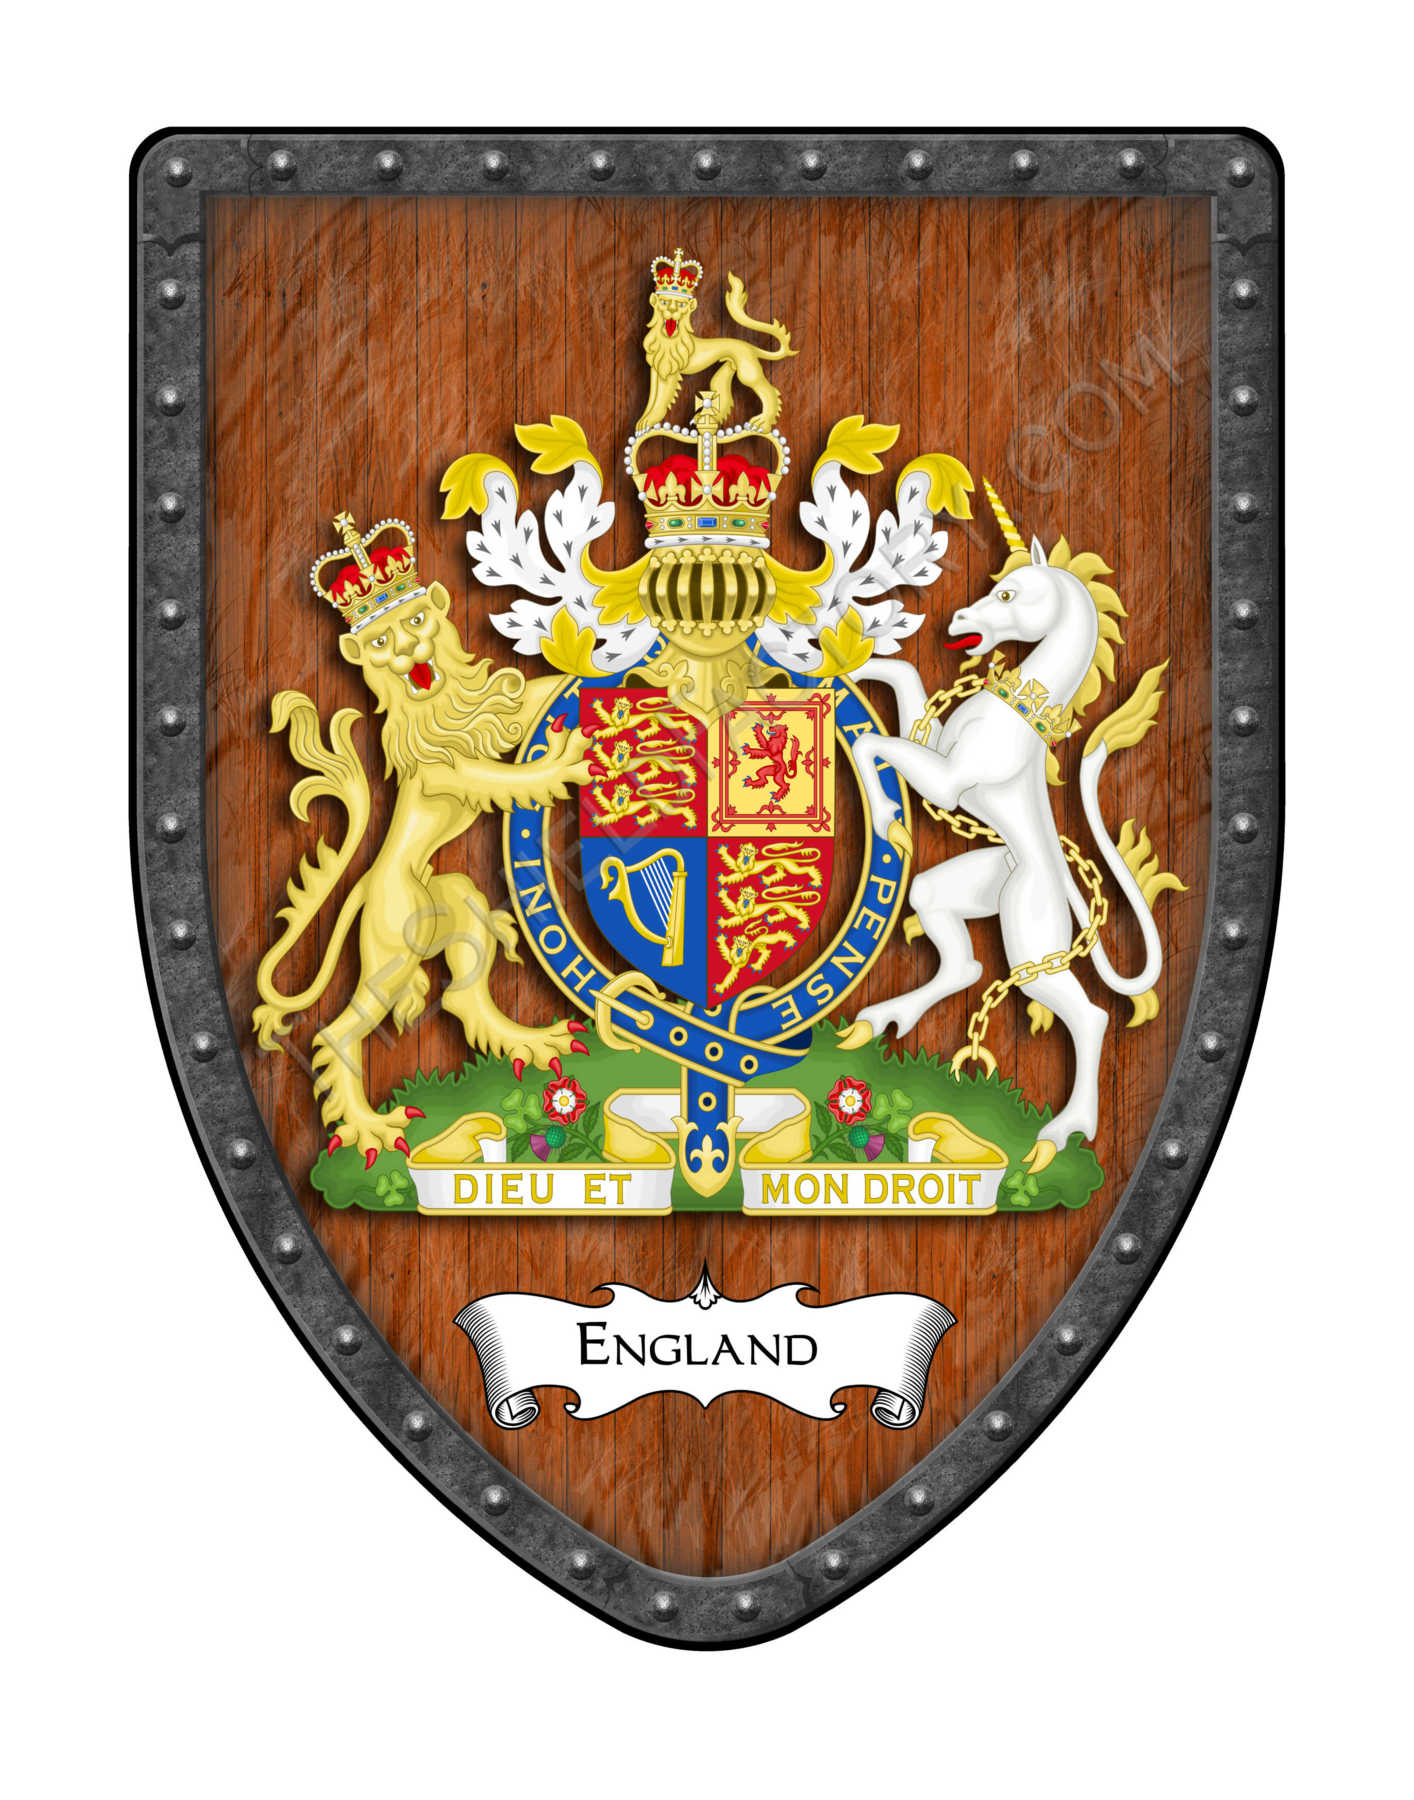 Countries of Eurepe Royal Coat of Arms Shields